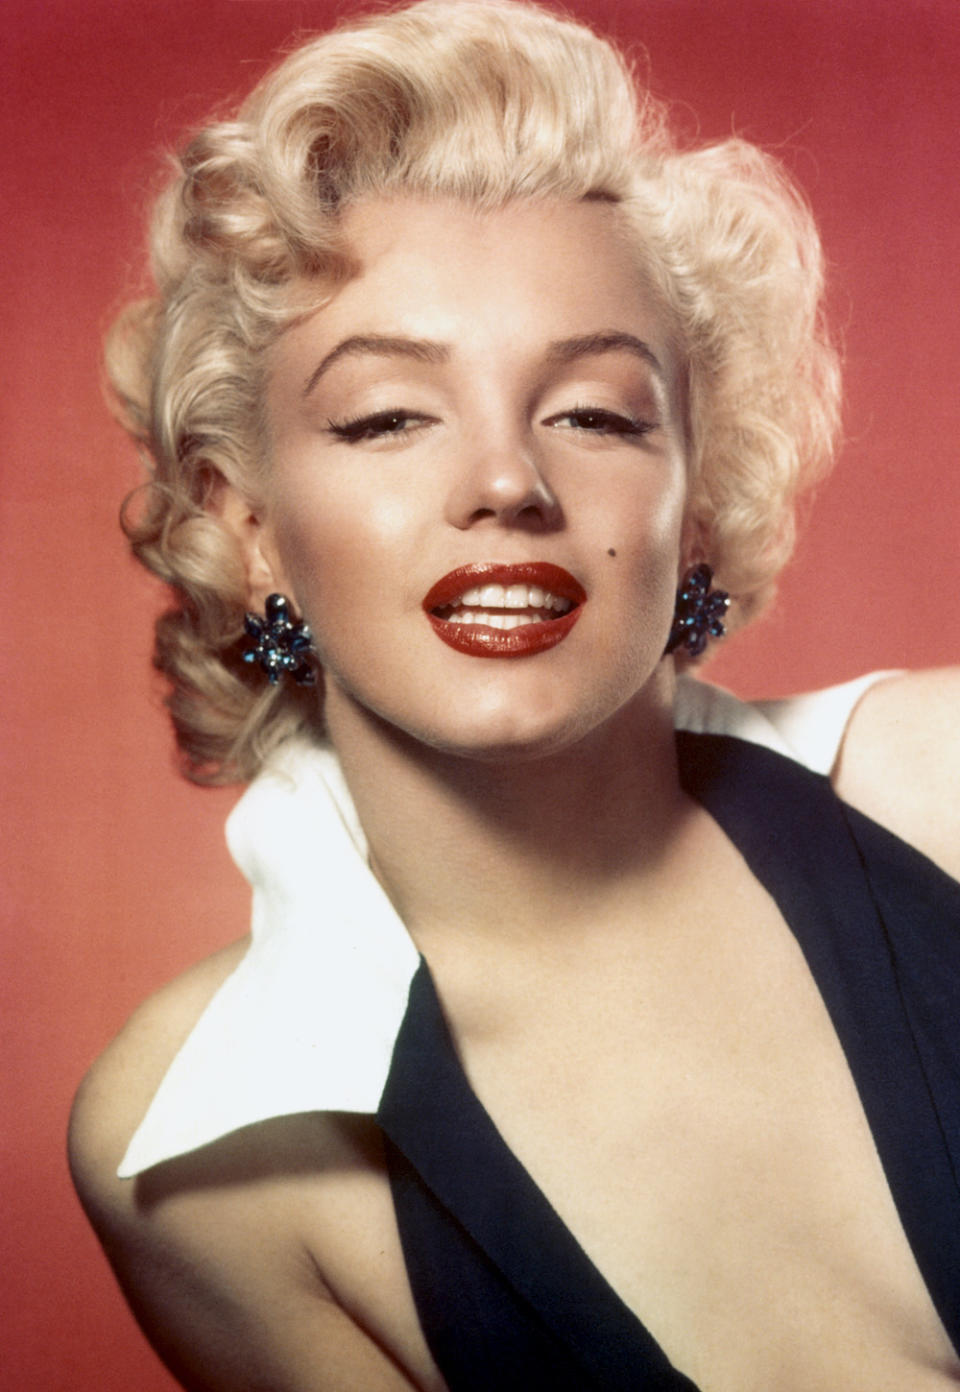 <p> Rollers were popular in the '50s and shorter-to-medium length hair was often worn in curls. Actress Marilyn Monroe often wore this hairstyle, to the point that this look is often referred to simply as "The Marilyn". </p>